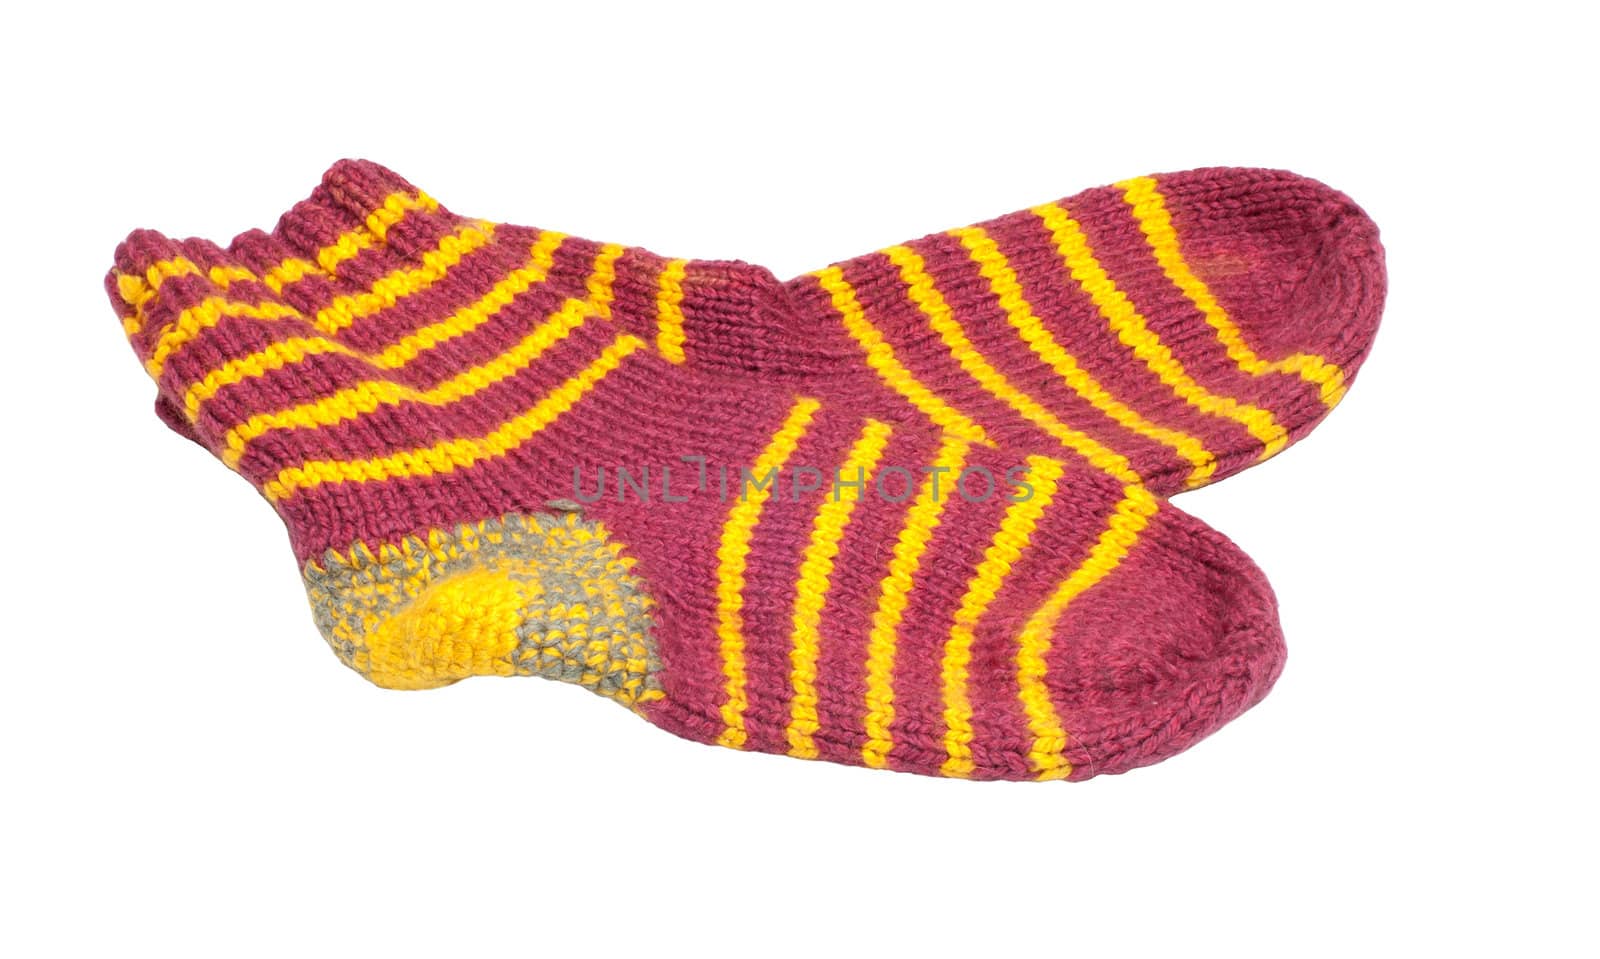 Pair of knitted woolen socks it is isolated on a white background.